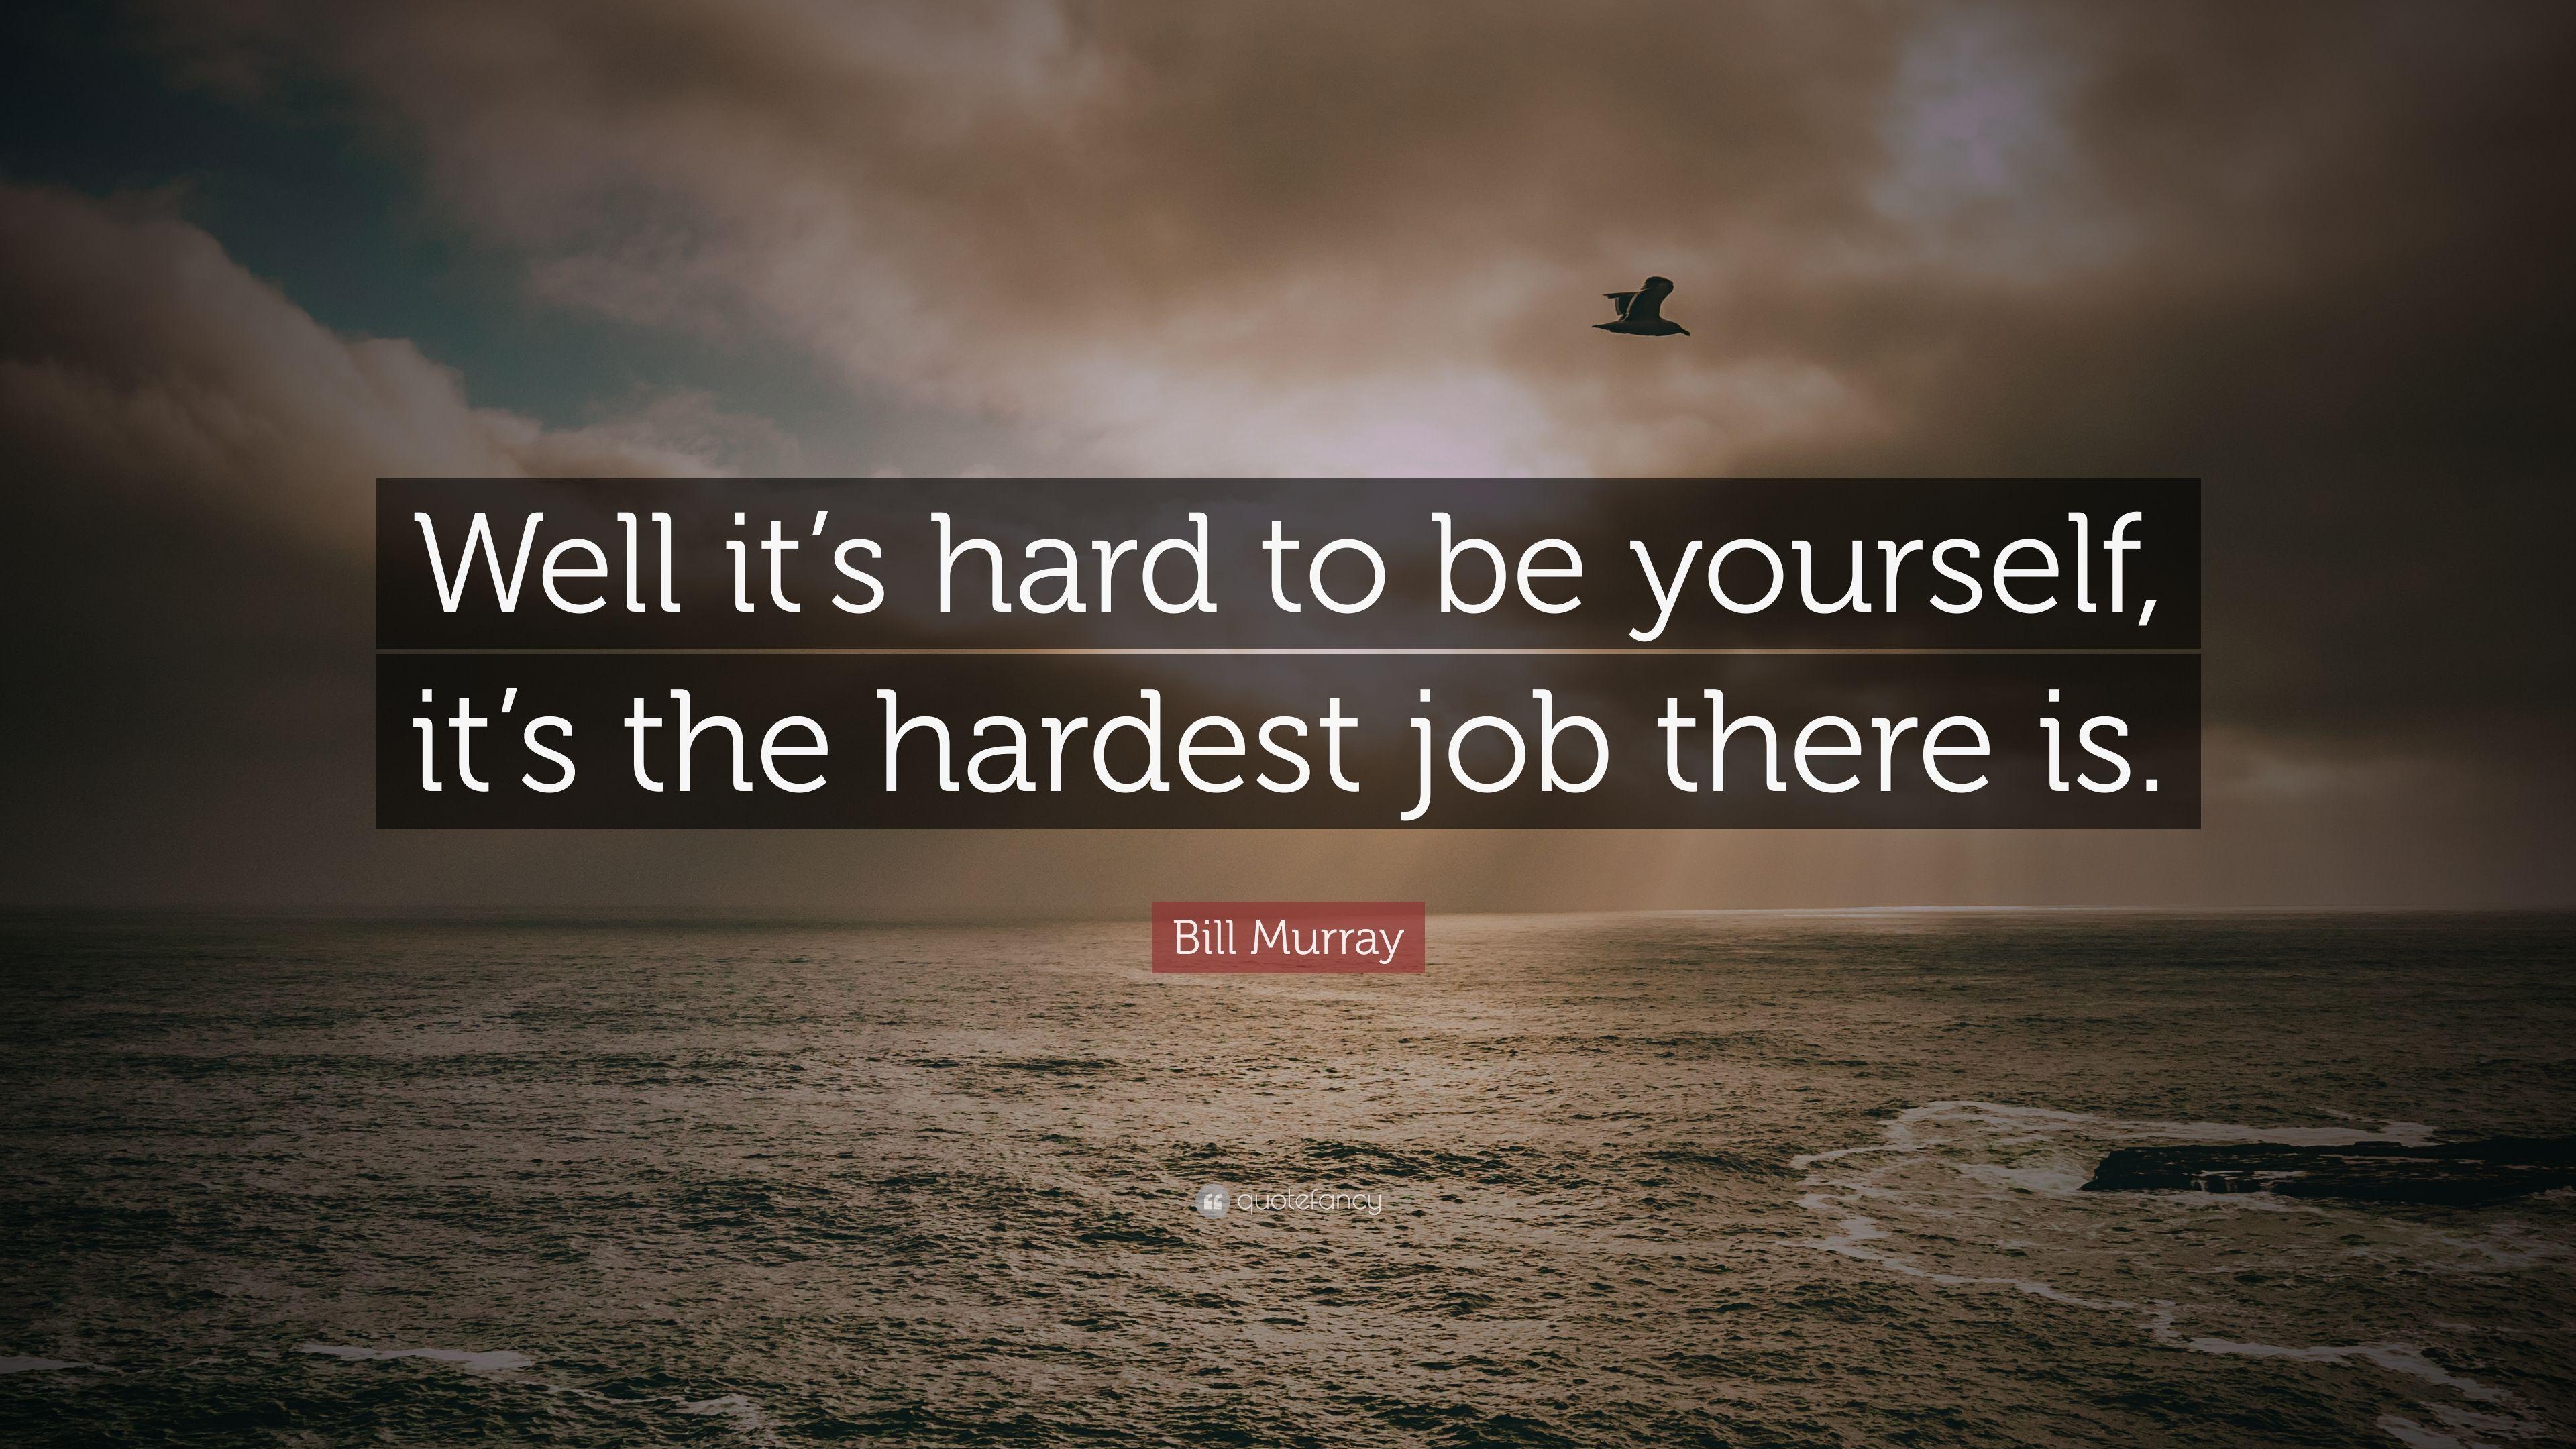 Bill Murray Quote: “Well it's hard to be yourself, it's